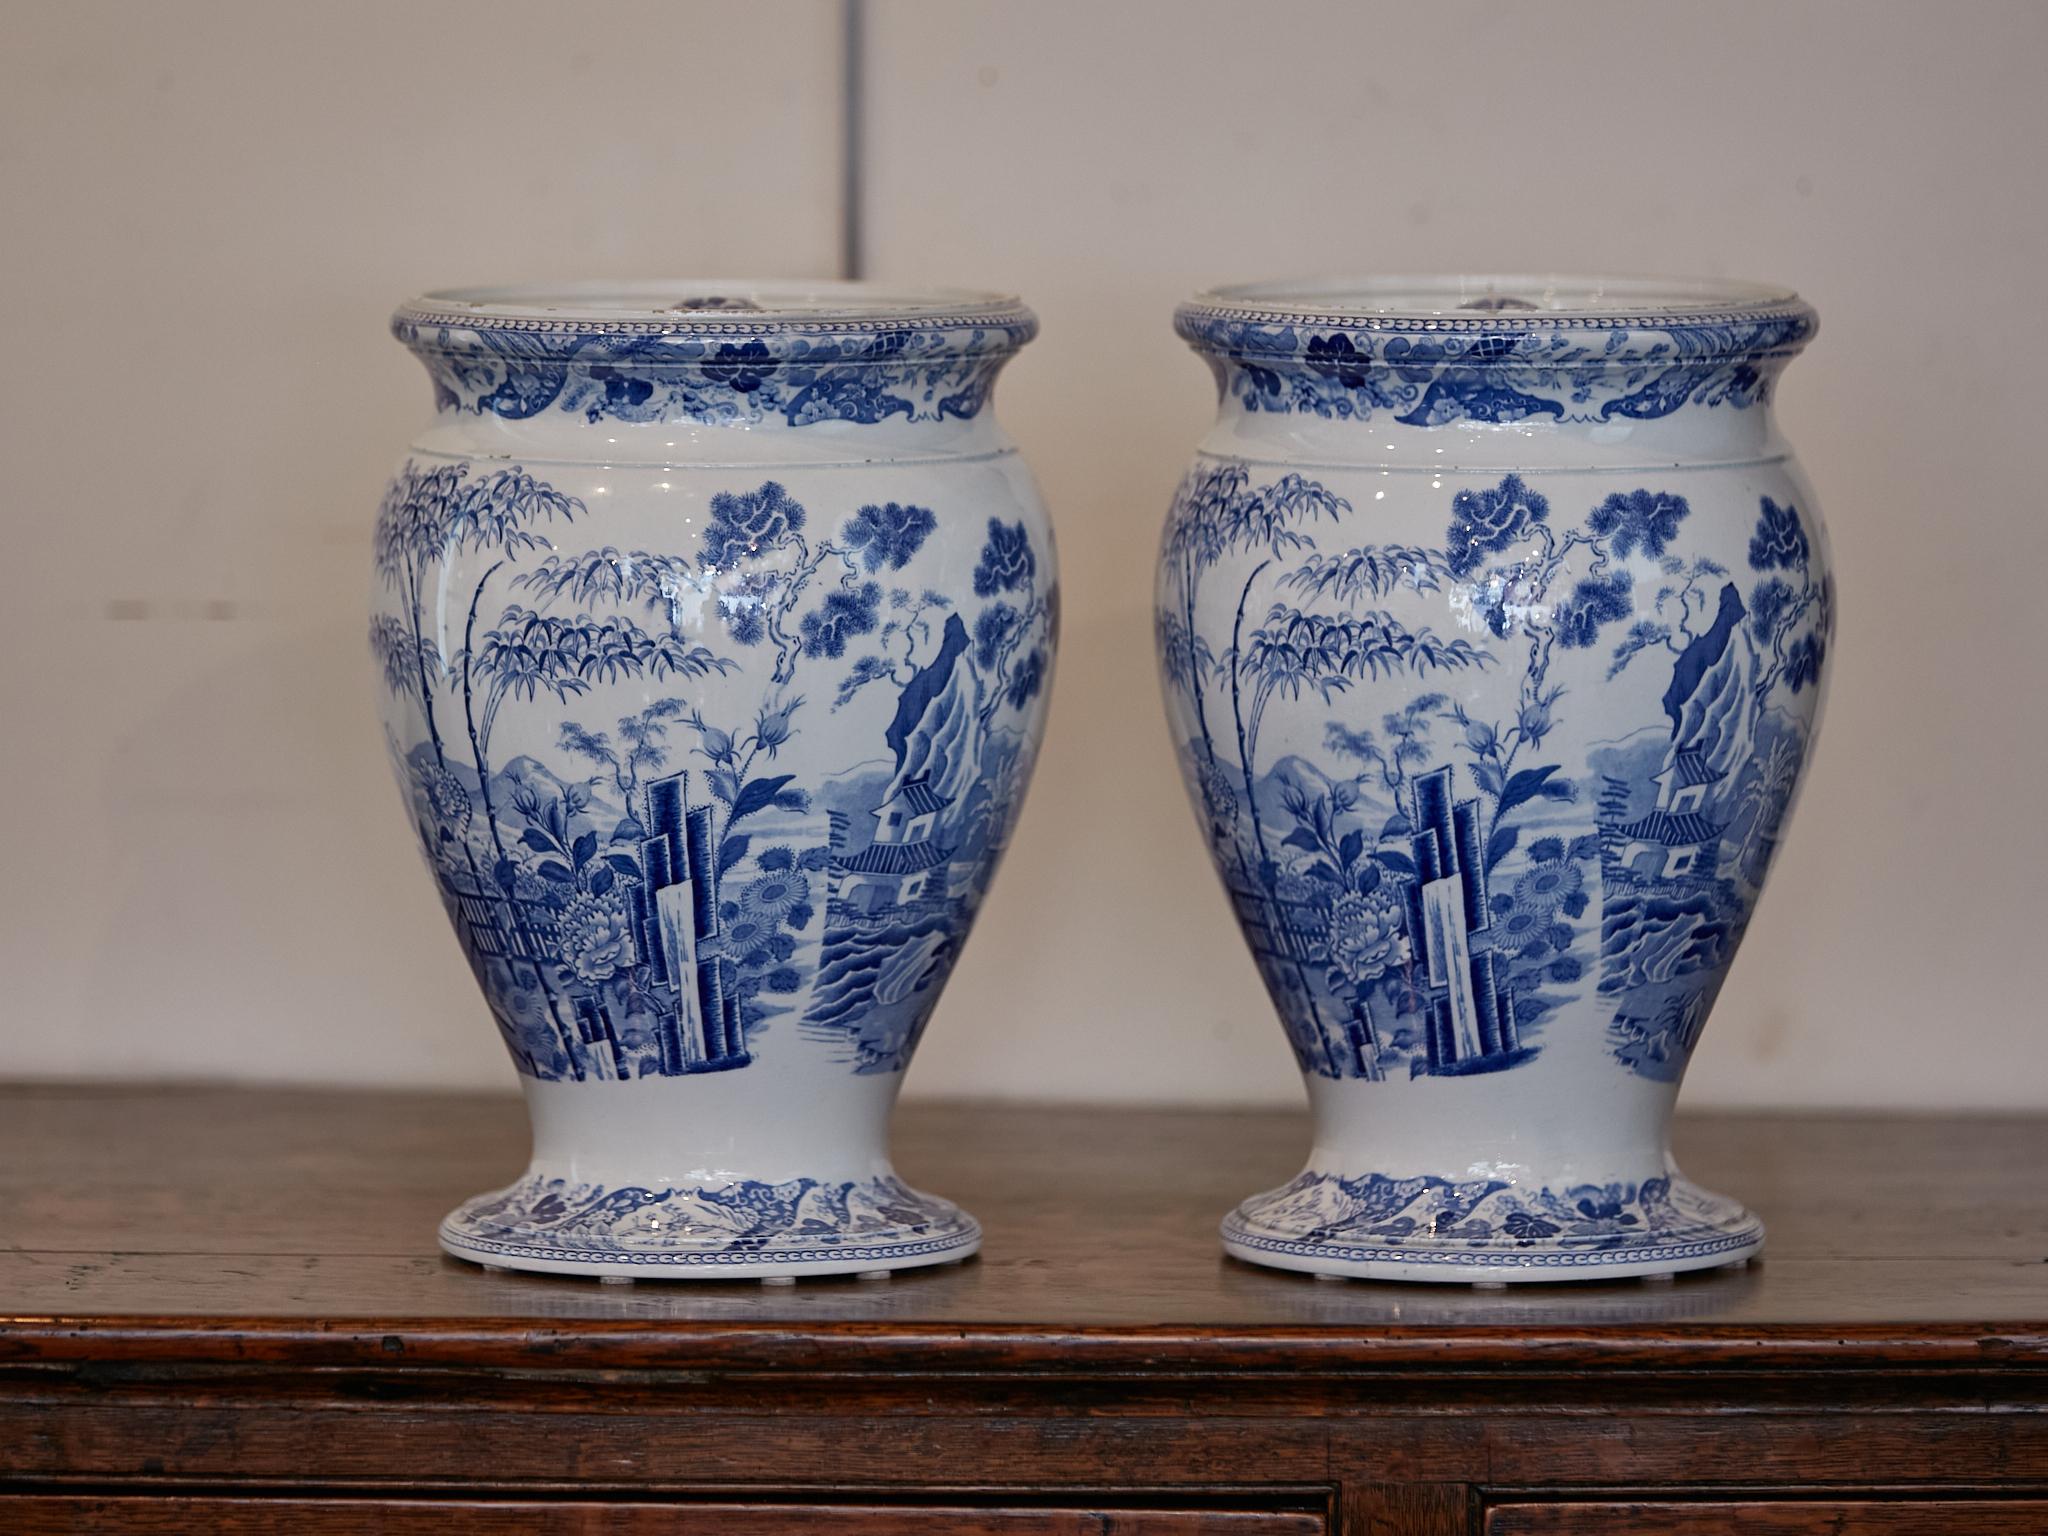 Victorian English Wedgwood Blue Palissade Lidded Urns with Chinoiserie Gardens, a Pair